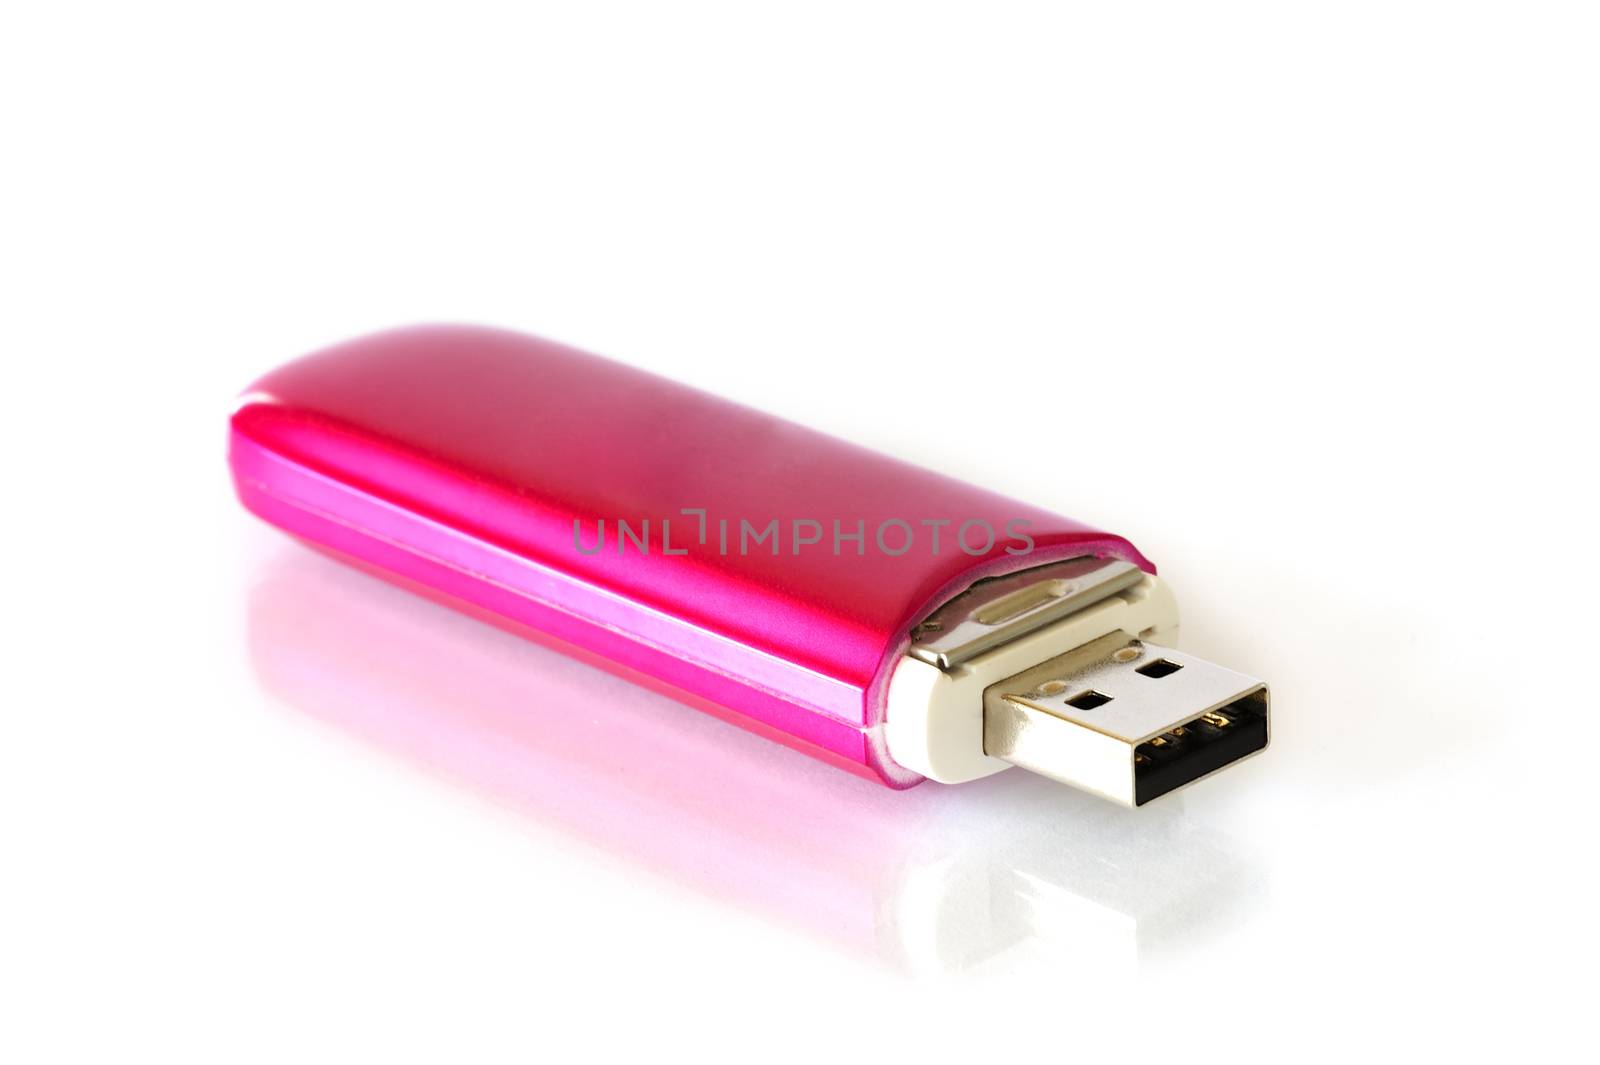 Usb flash memory by a40757